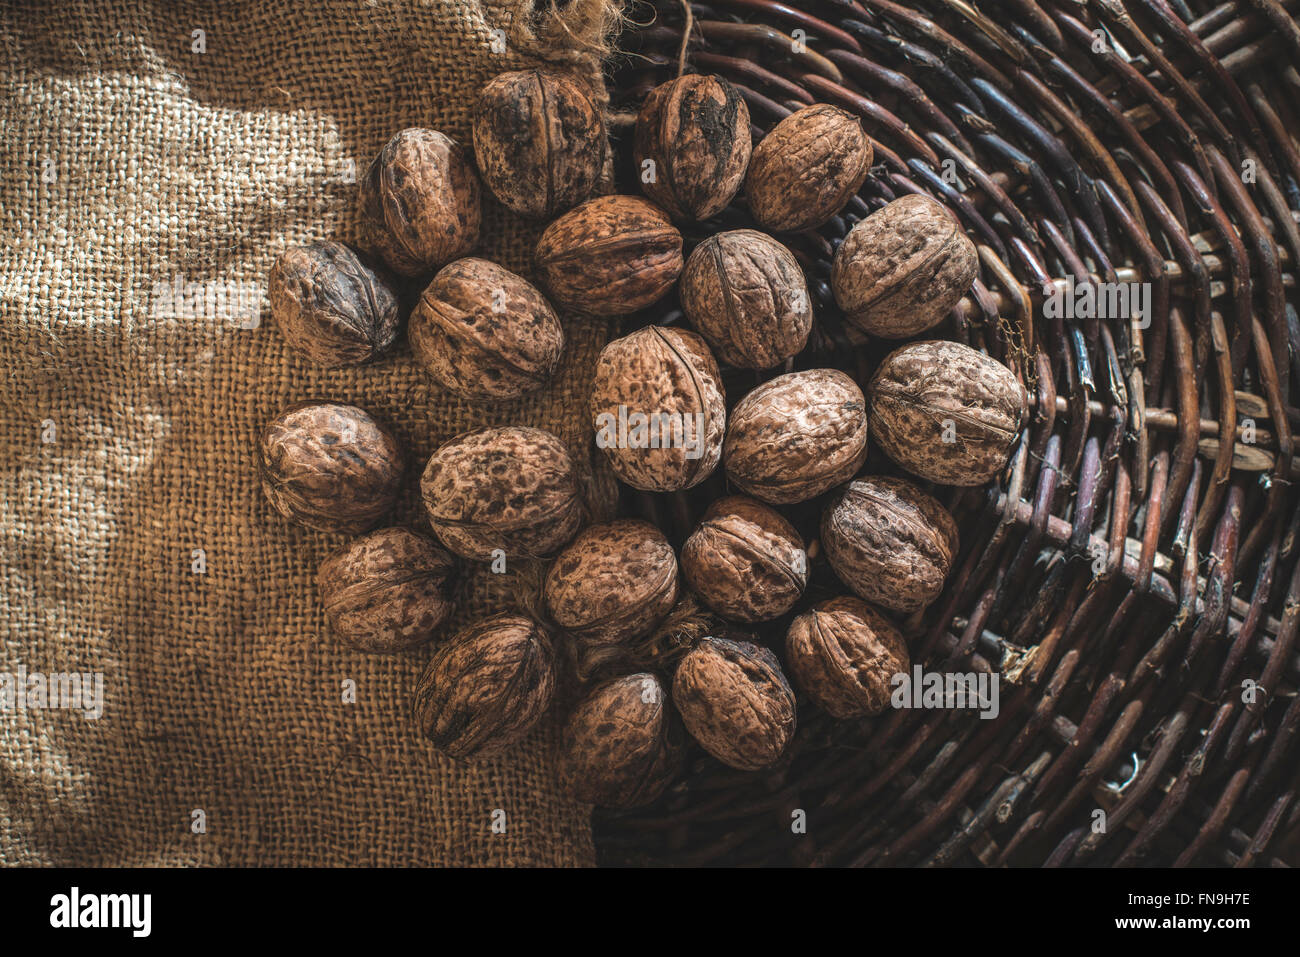 walnuts in a basket Stock Photo